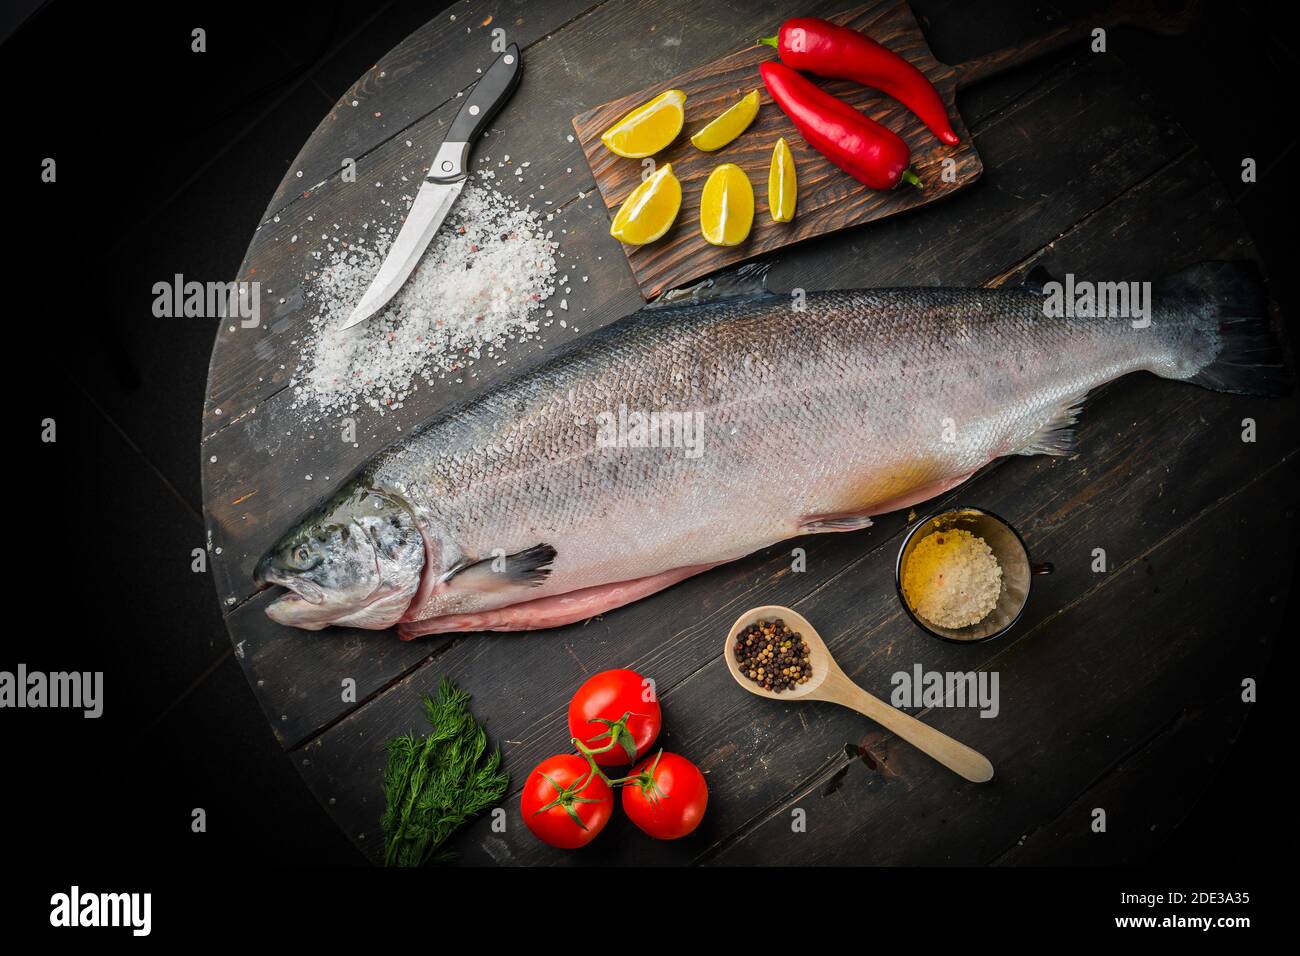 Big fresh salmon with ingredients for cooking on wooden background  Stock Photo